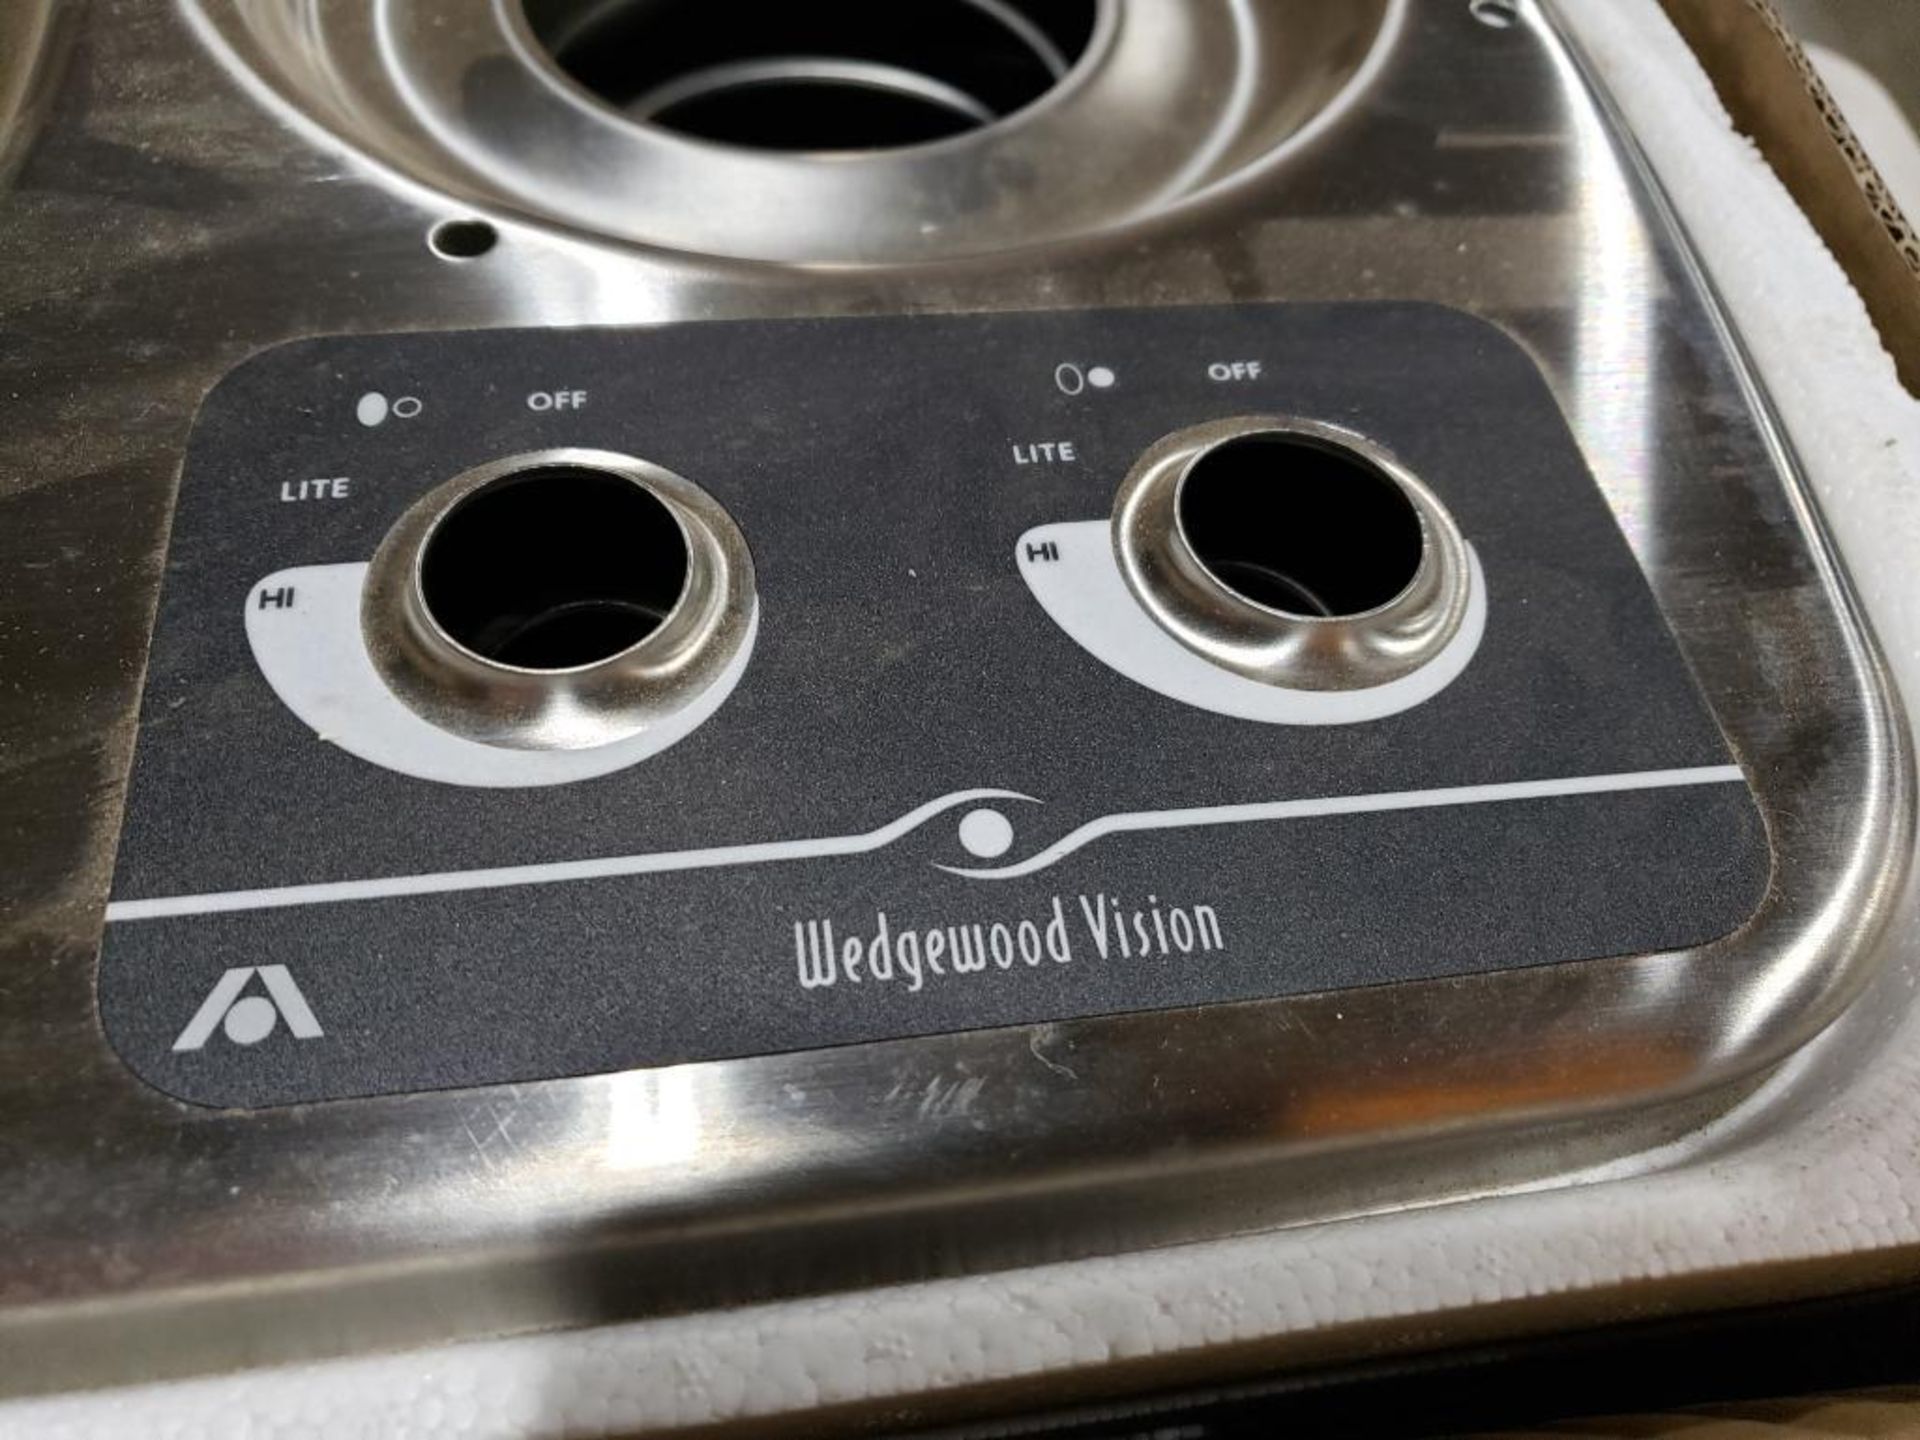 Qty 9 - Atwood Wedgewood Vision cook top replacement stainless tops. Part number 57099. - Image 3 of 7